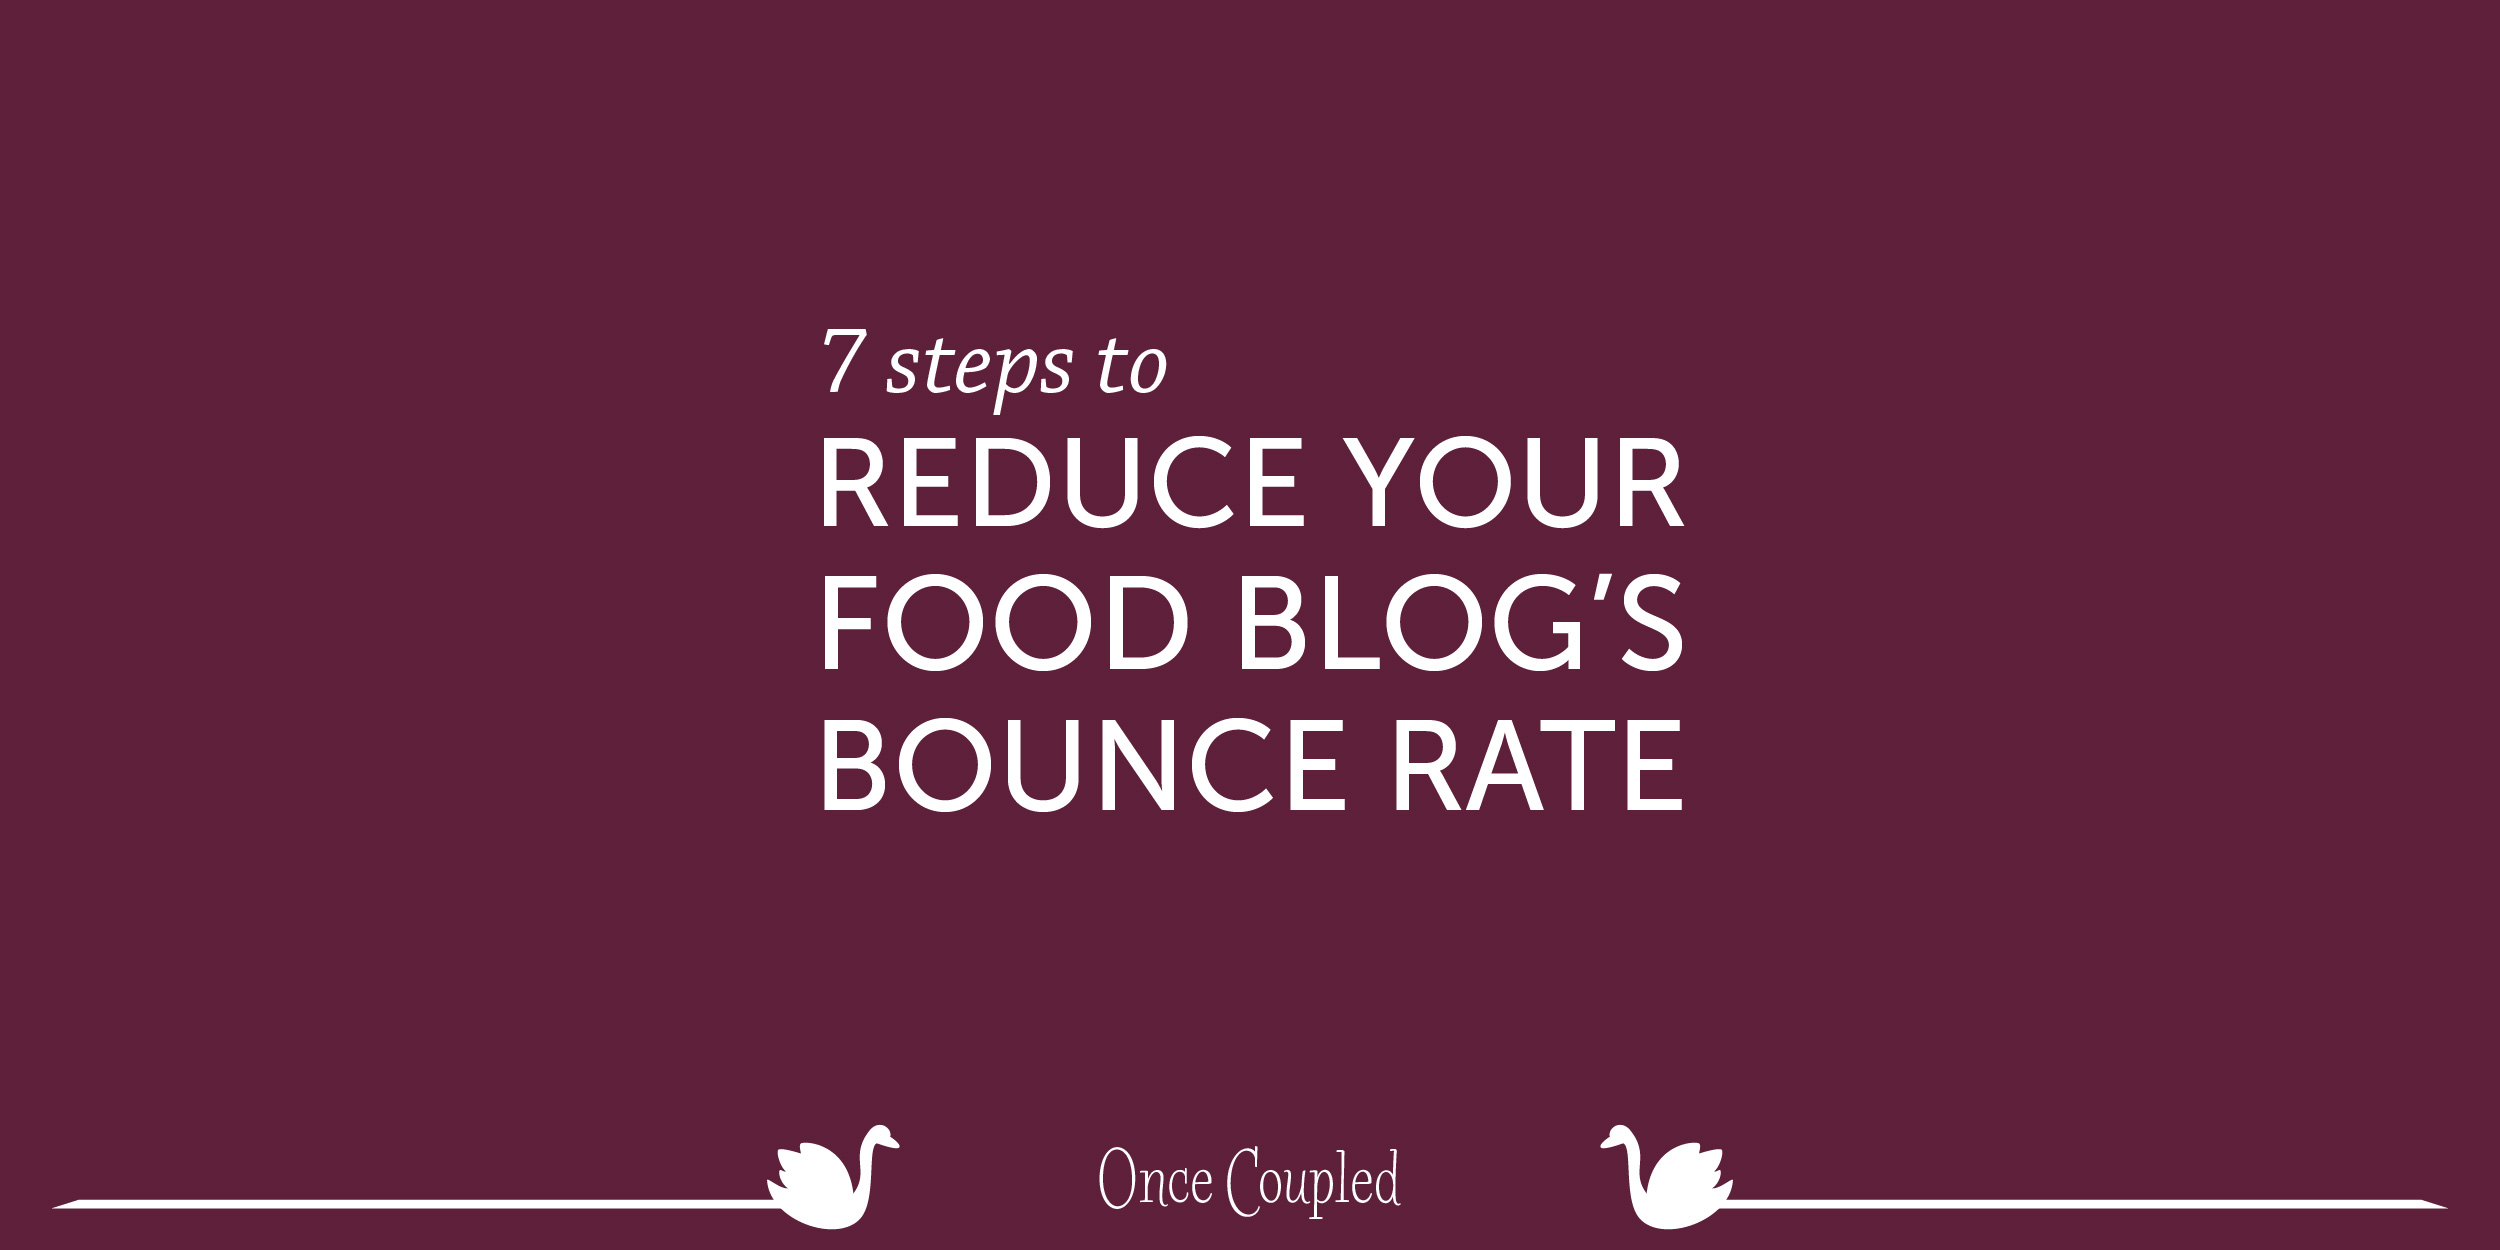 7 Steps to Reduce Your Food Blog’s Bounce Rate